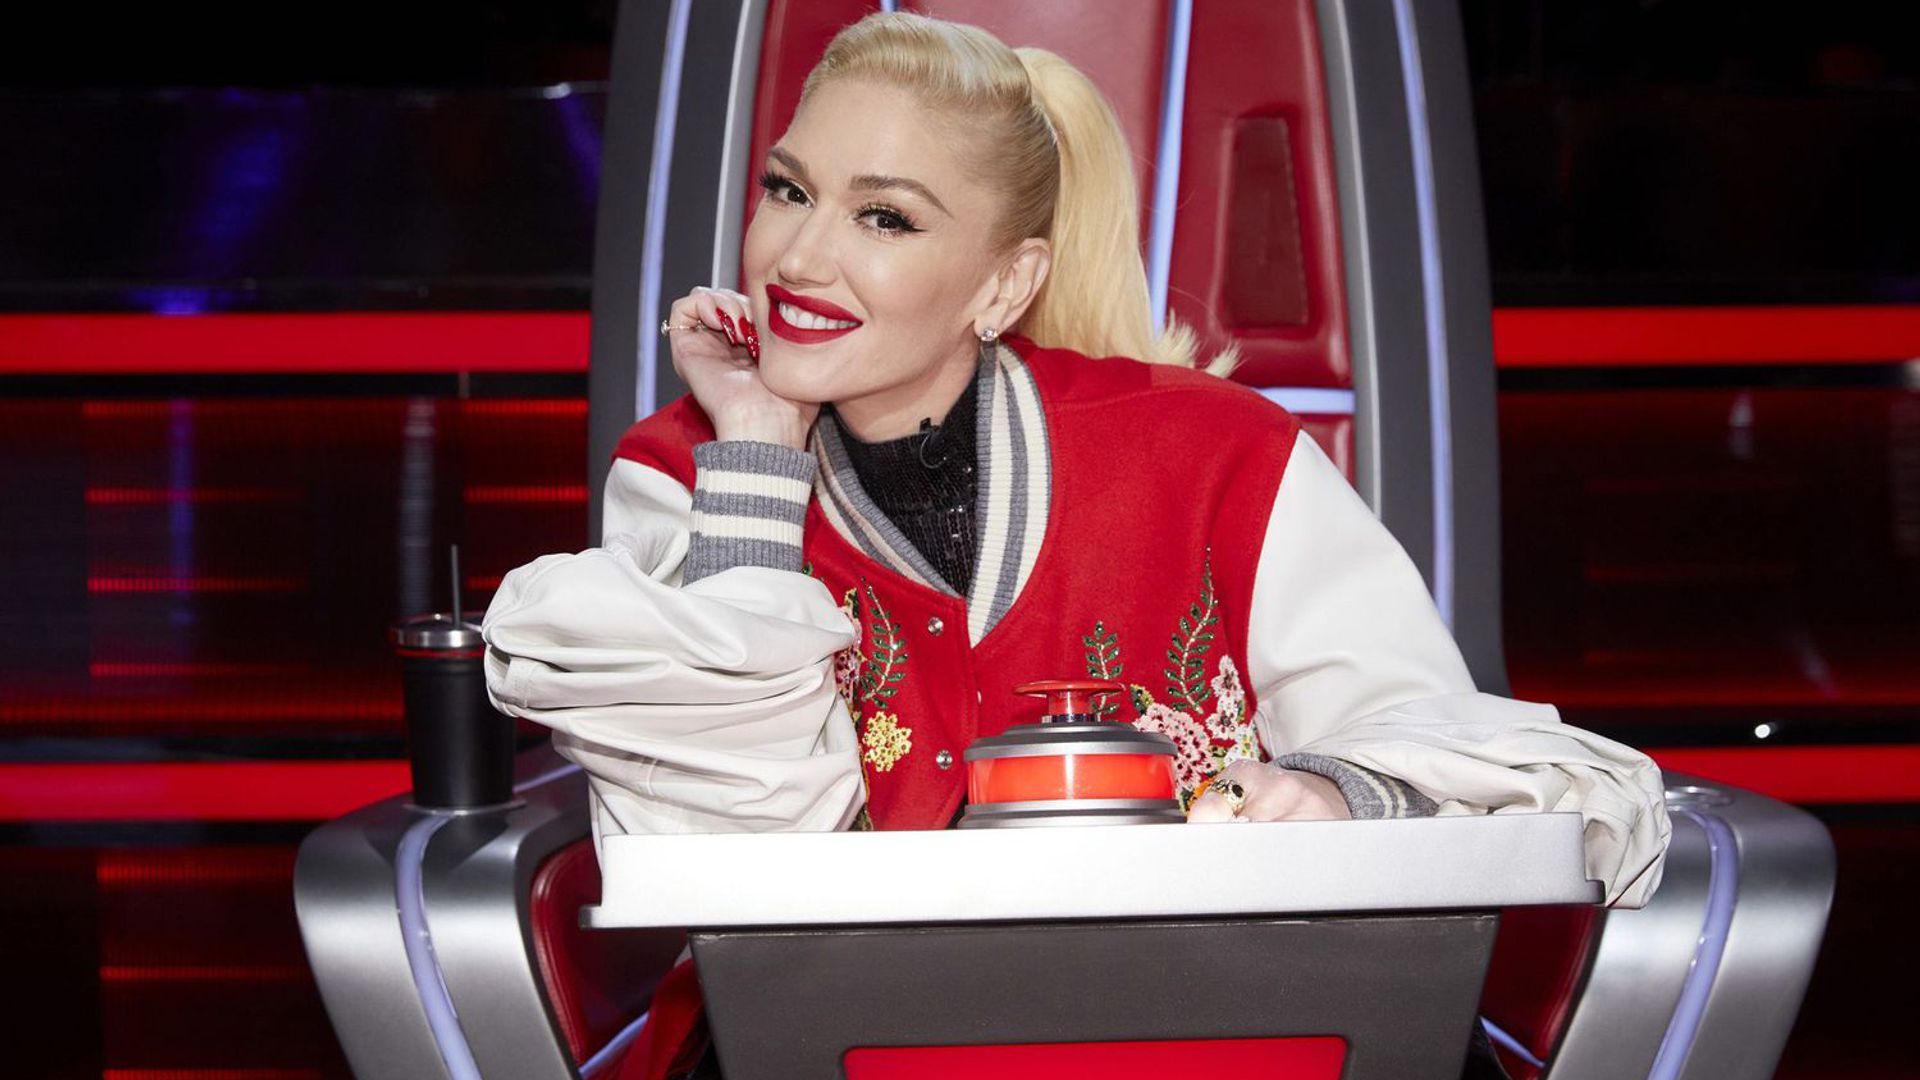 Gwen Stefani in the TV show “The Voice”